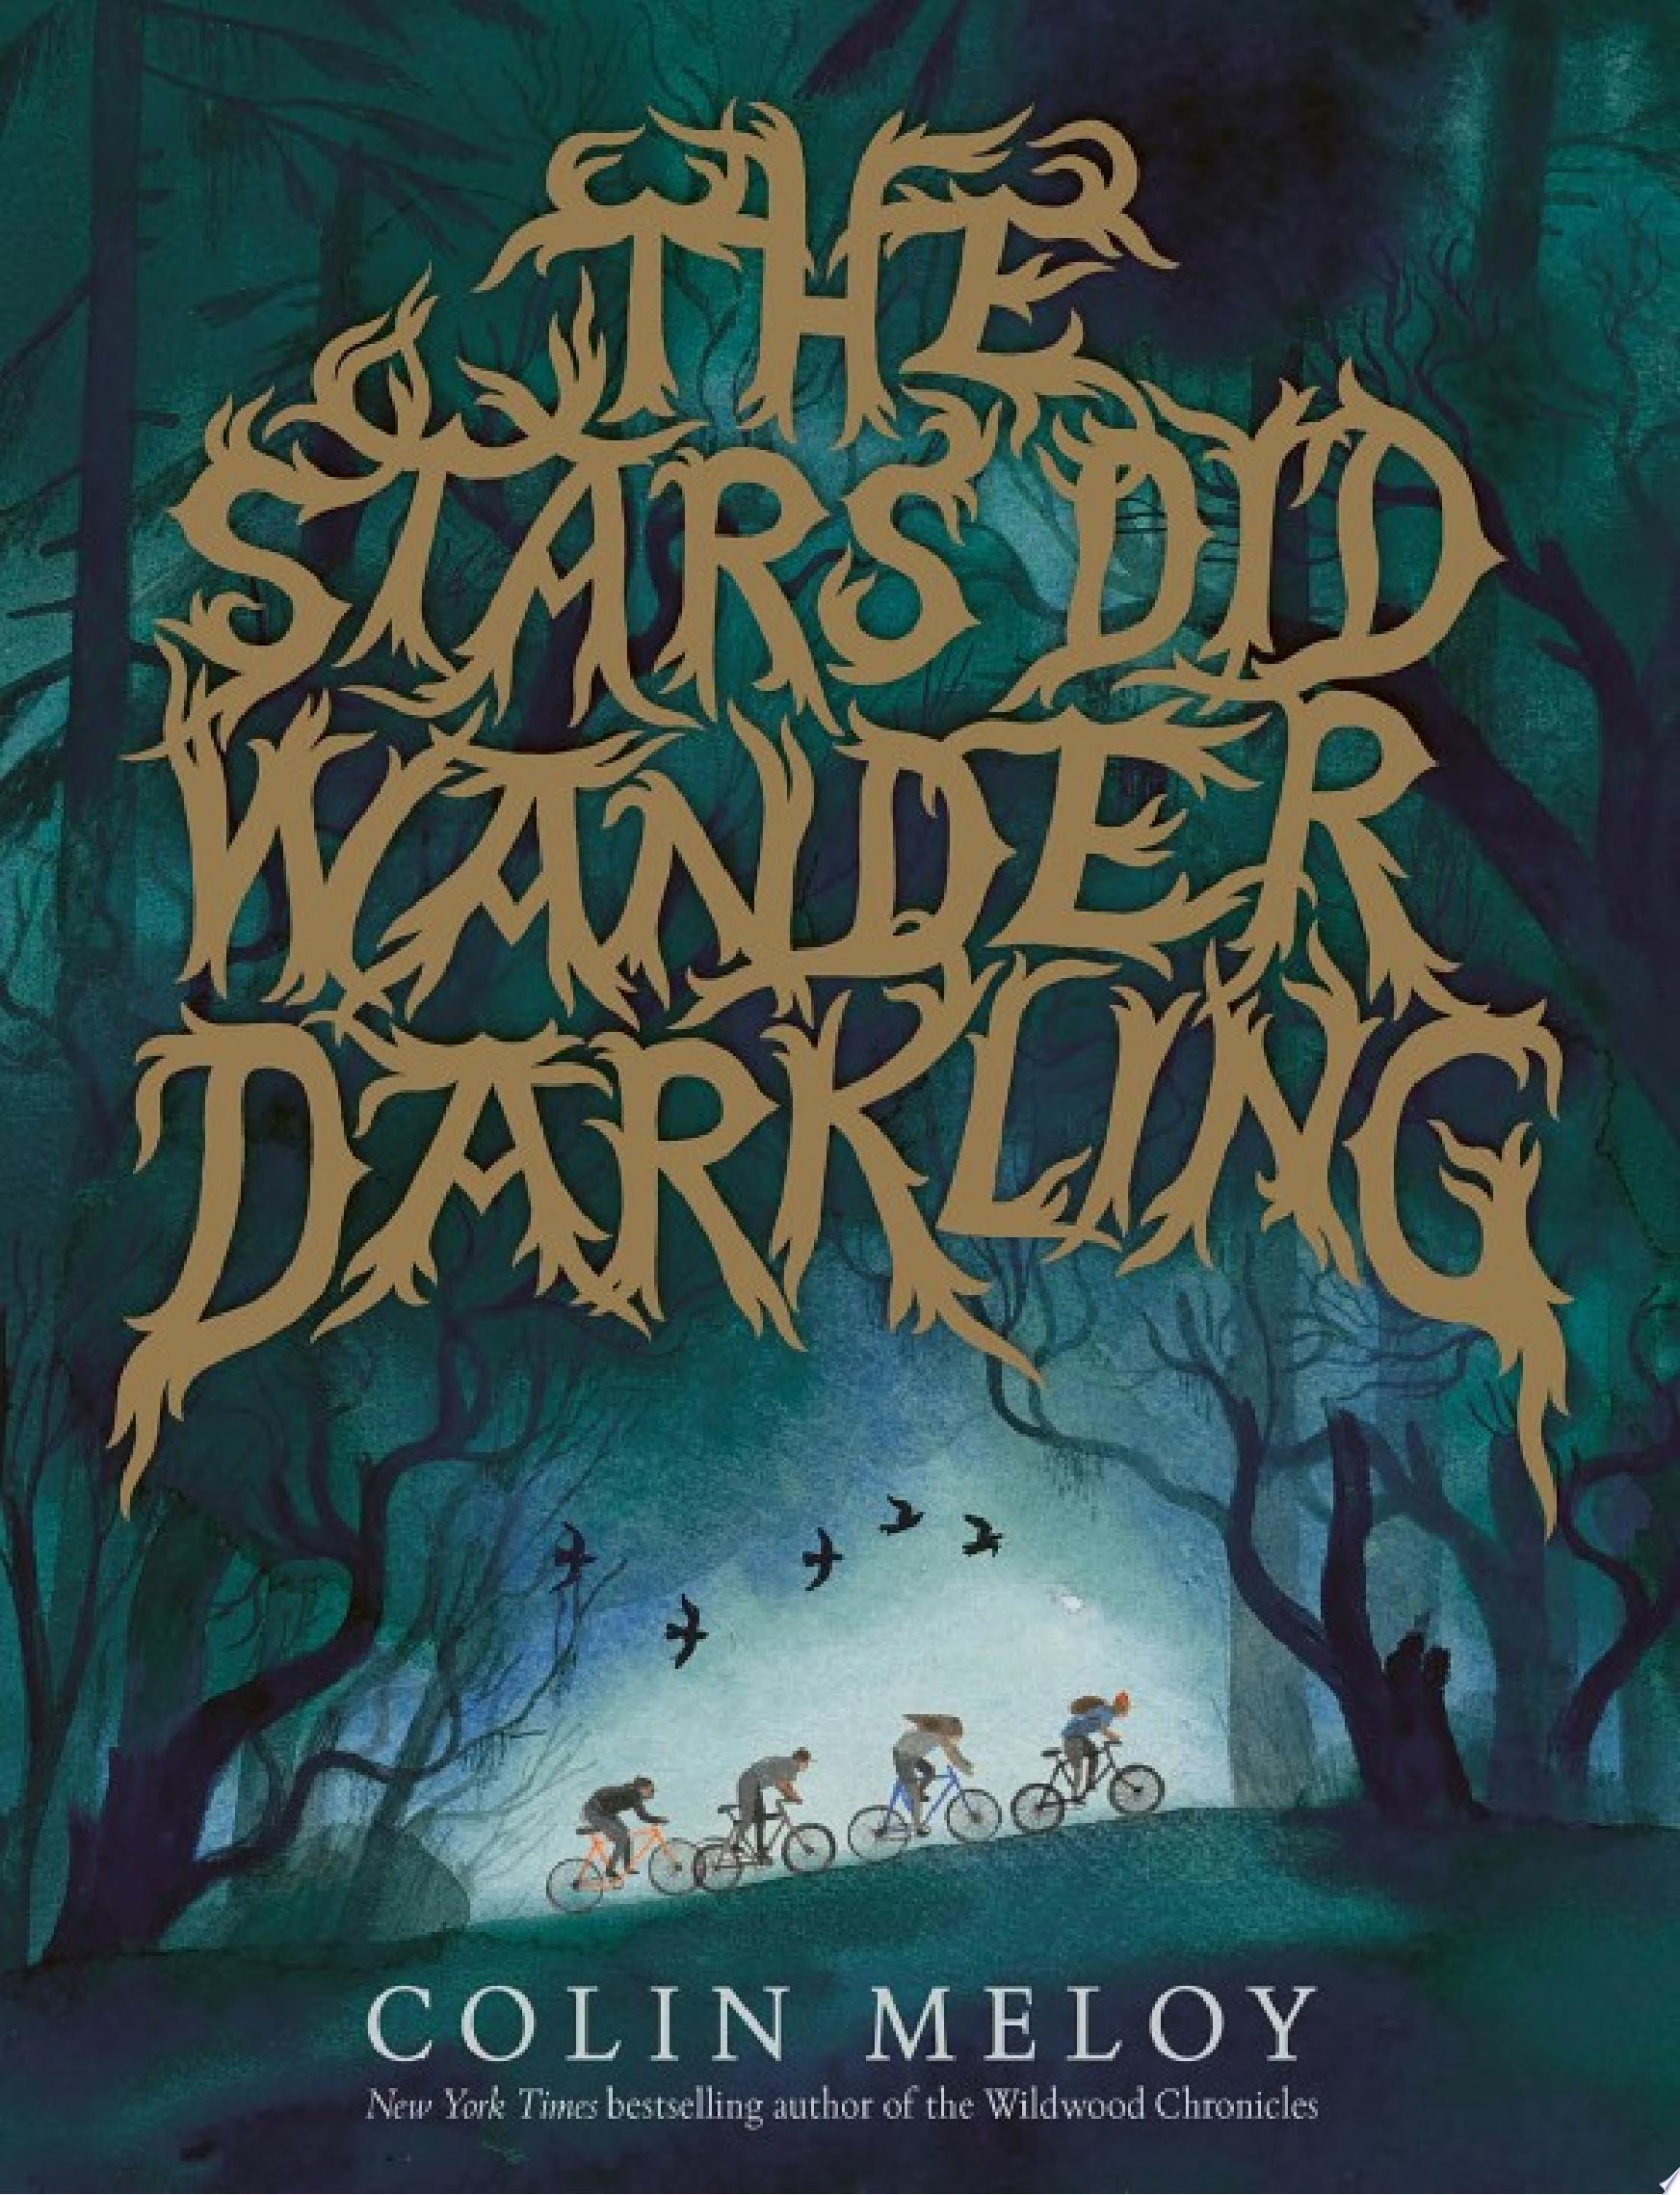 Image for "The Stars Did Wander Darkling"